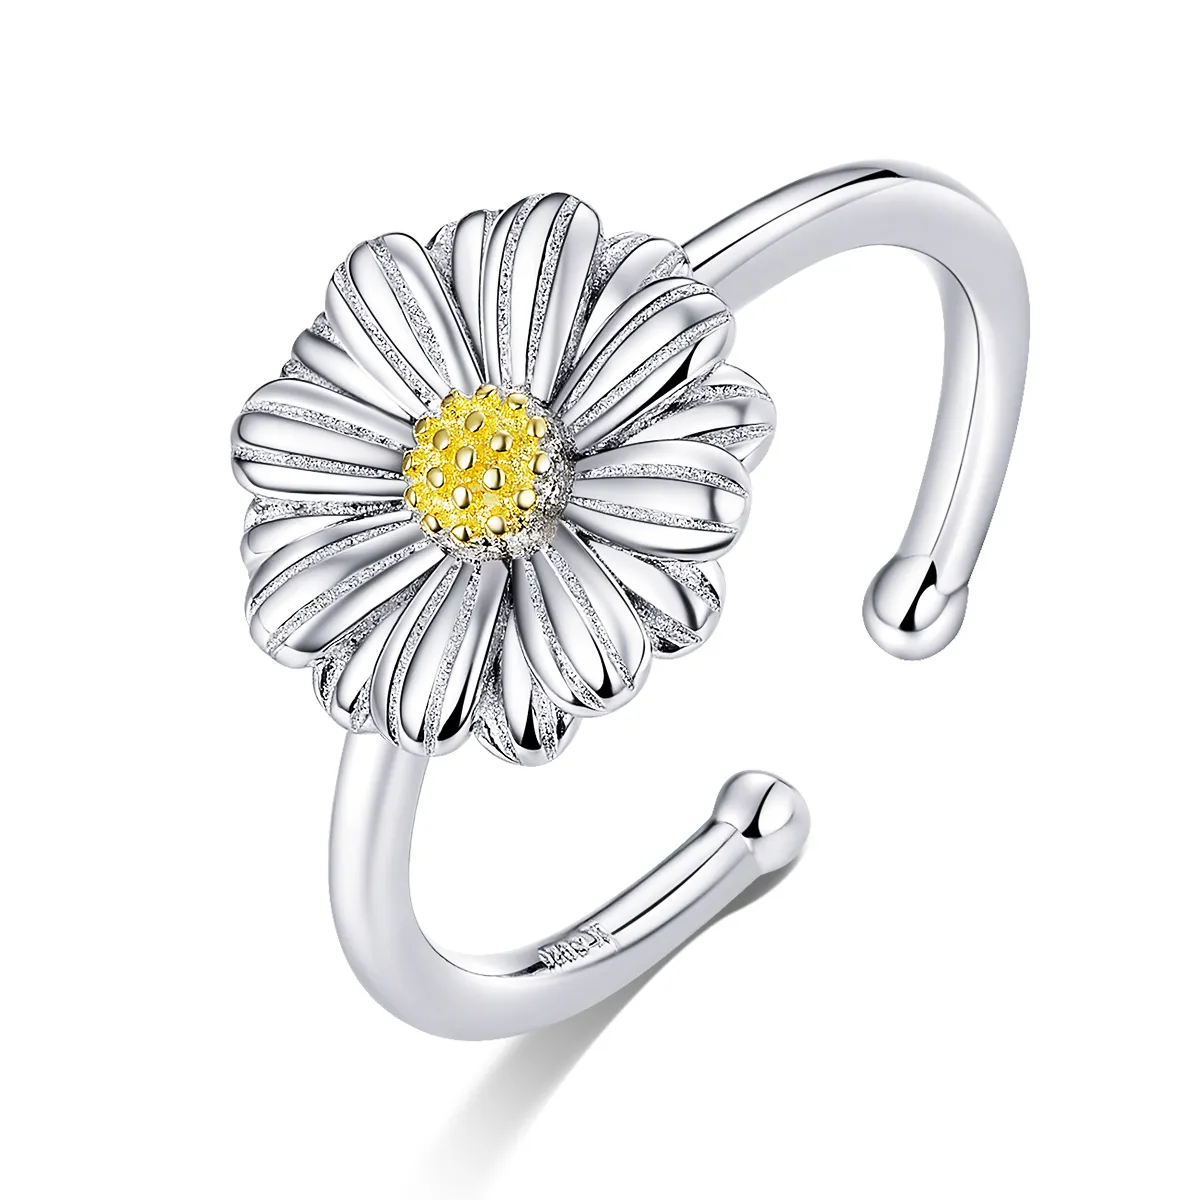 Pandora Style Two Tone Daisy Flower Open Ring - SCR616